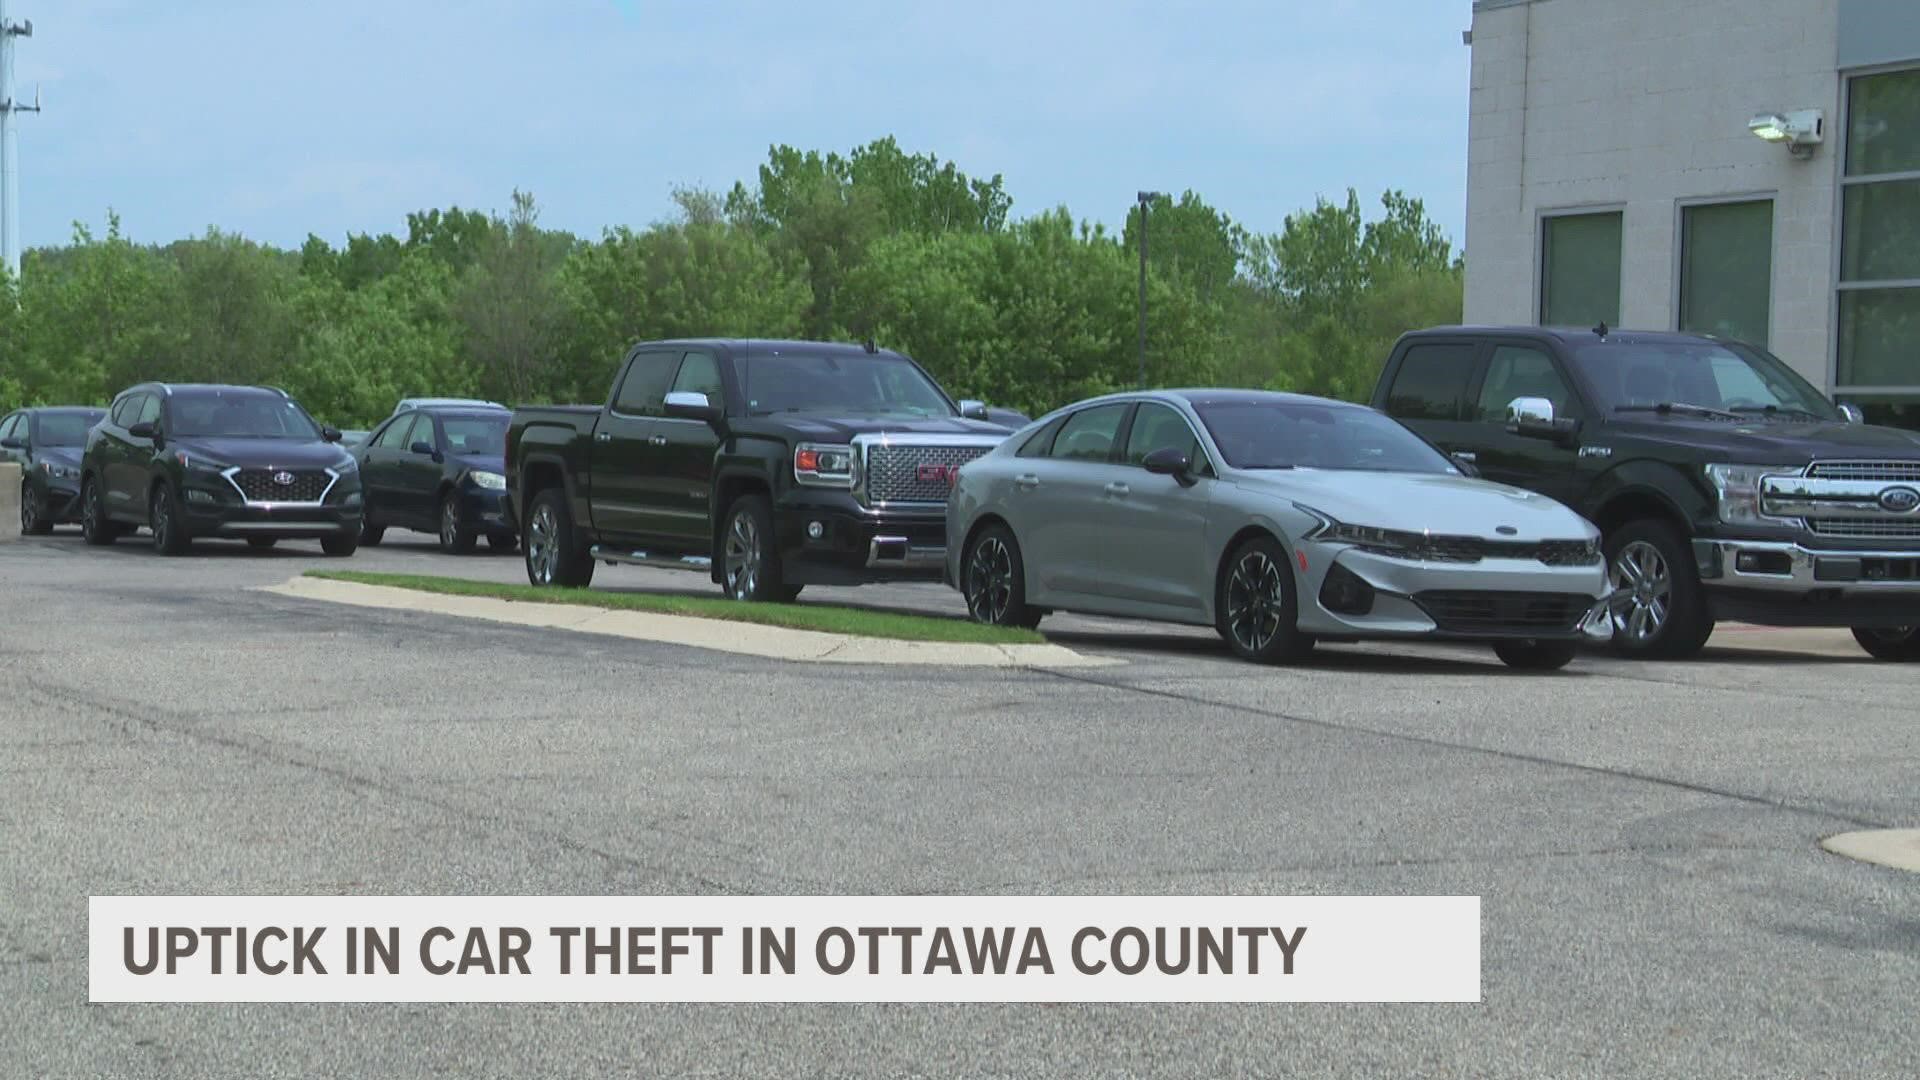 We've been following the uptick in car thefts around Grand Rapids and Kentwood, especially certain types of cars. The problem has now reached the lakeshore.